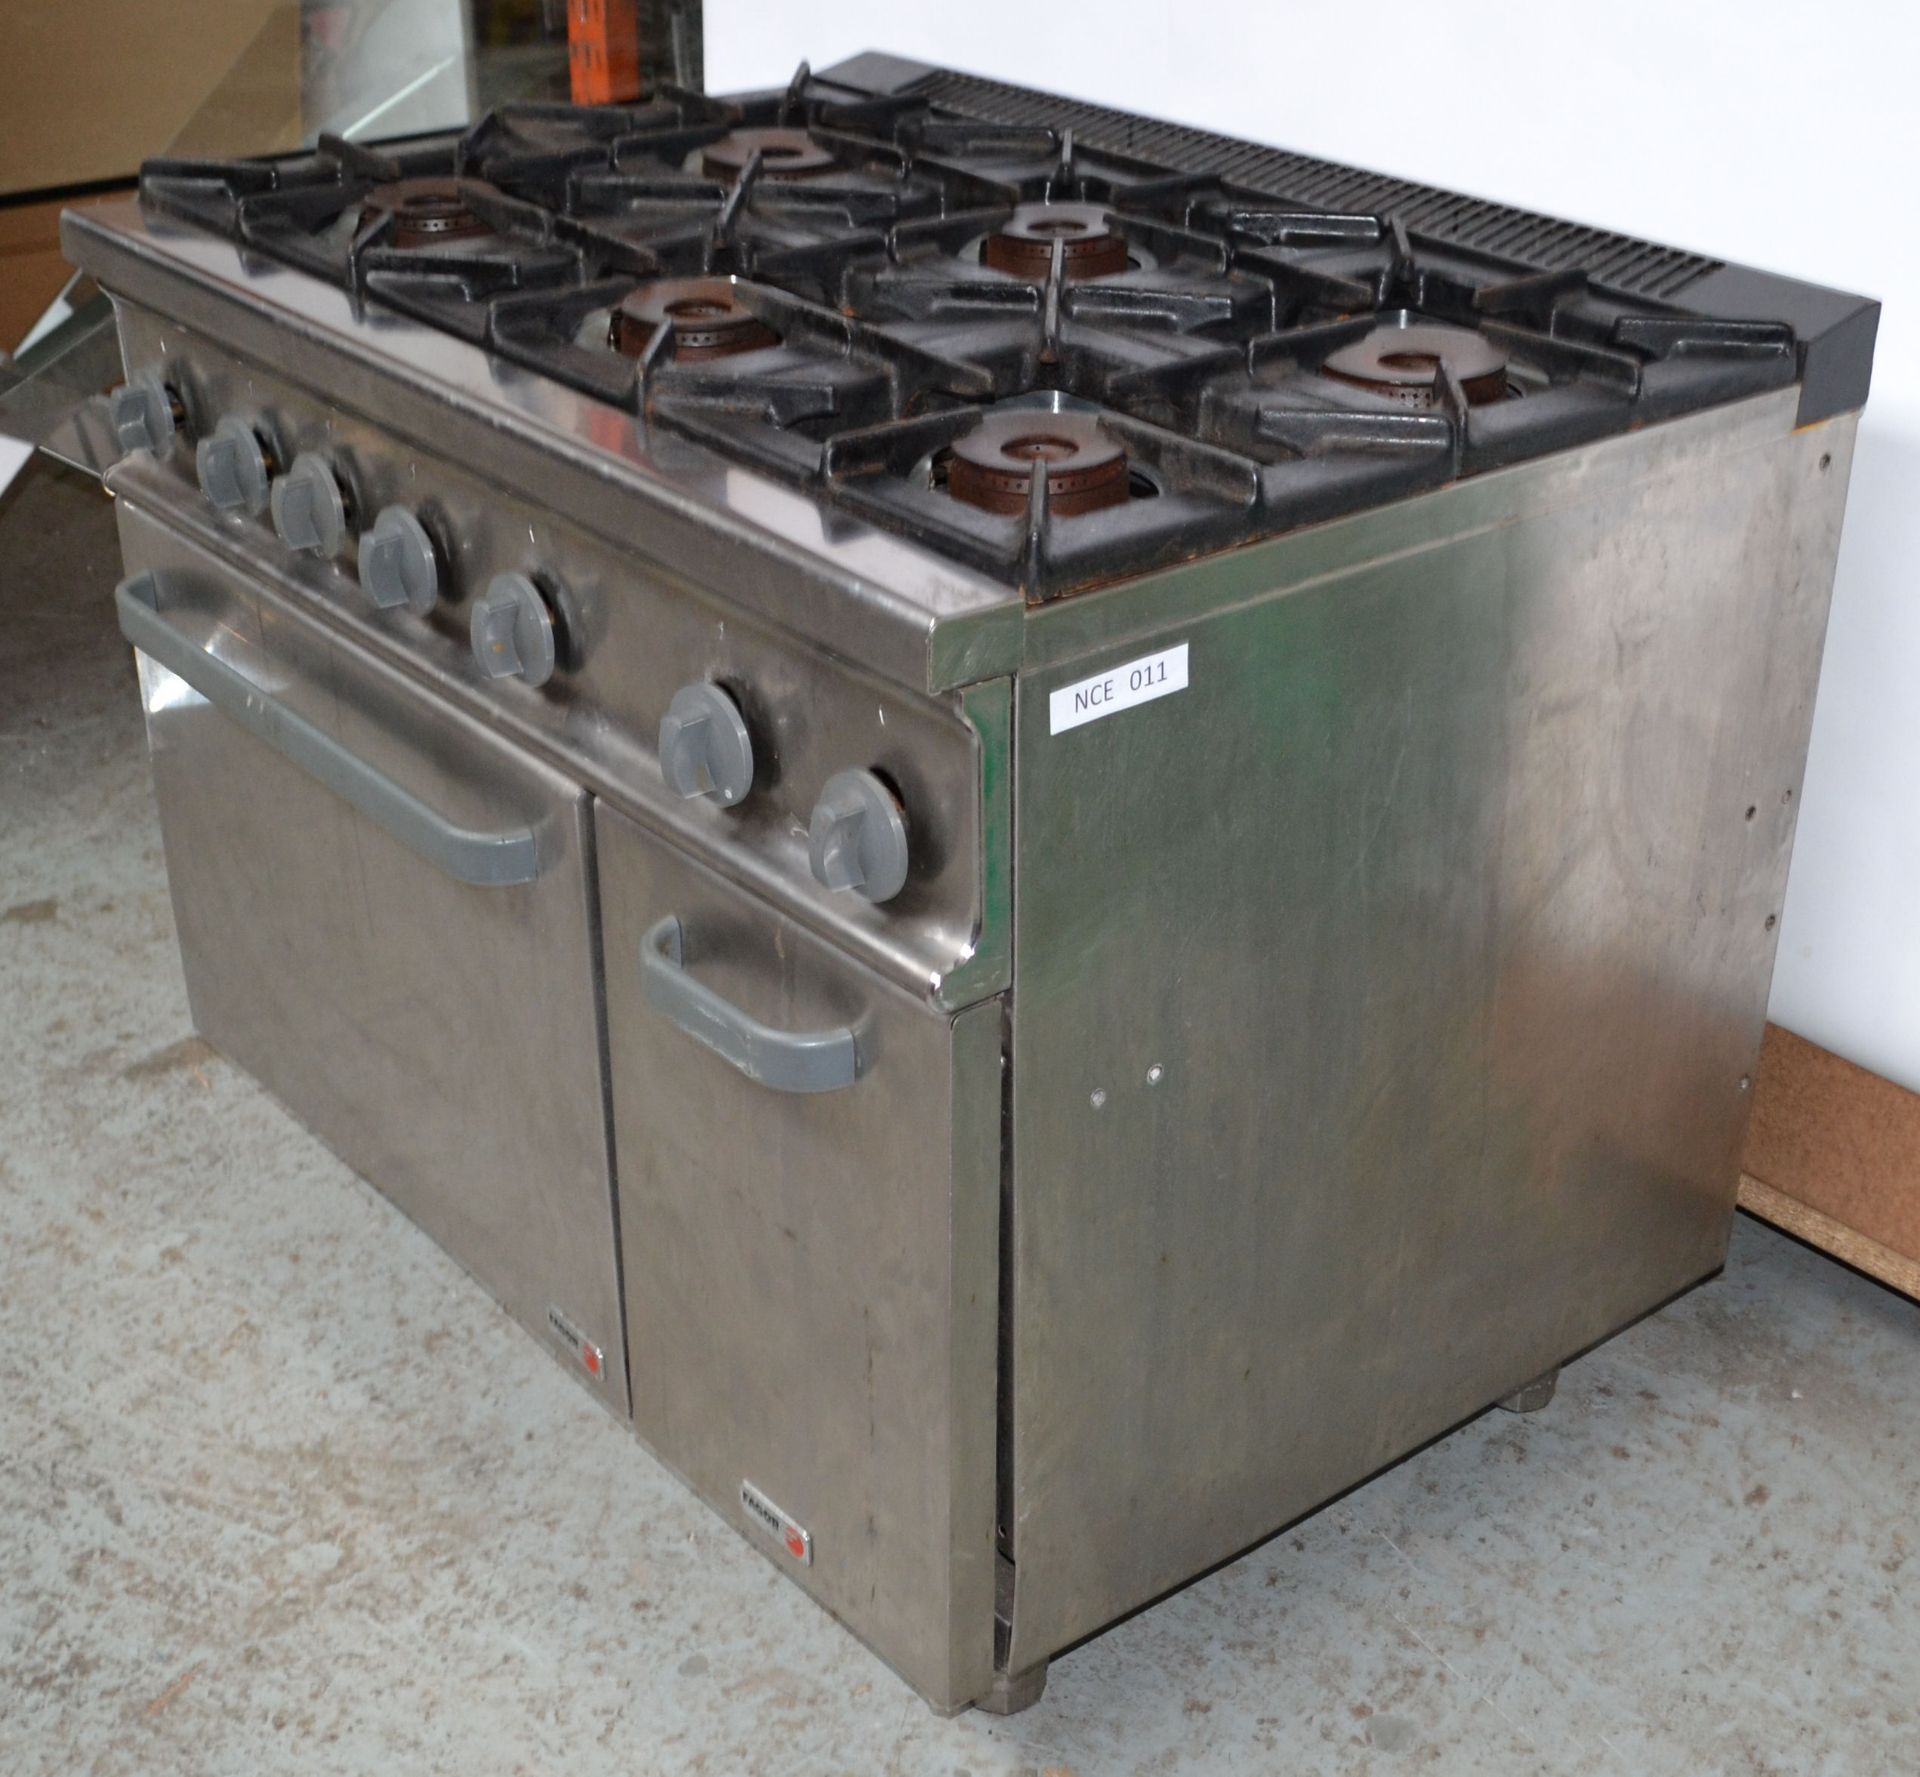 1 x Fagor Six Burner Gas Oven Range (CG-761 BR SM) - Ref NCE011 - CL178 - Location: Altrincham - Image 5 of 15